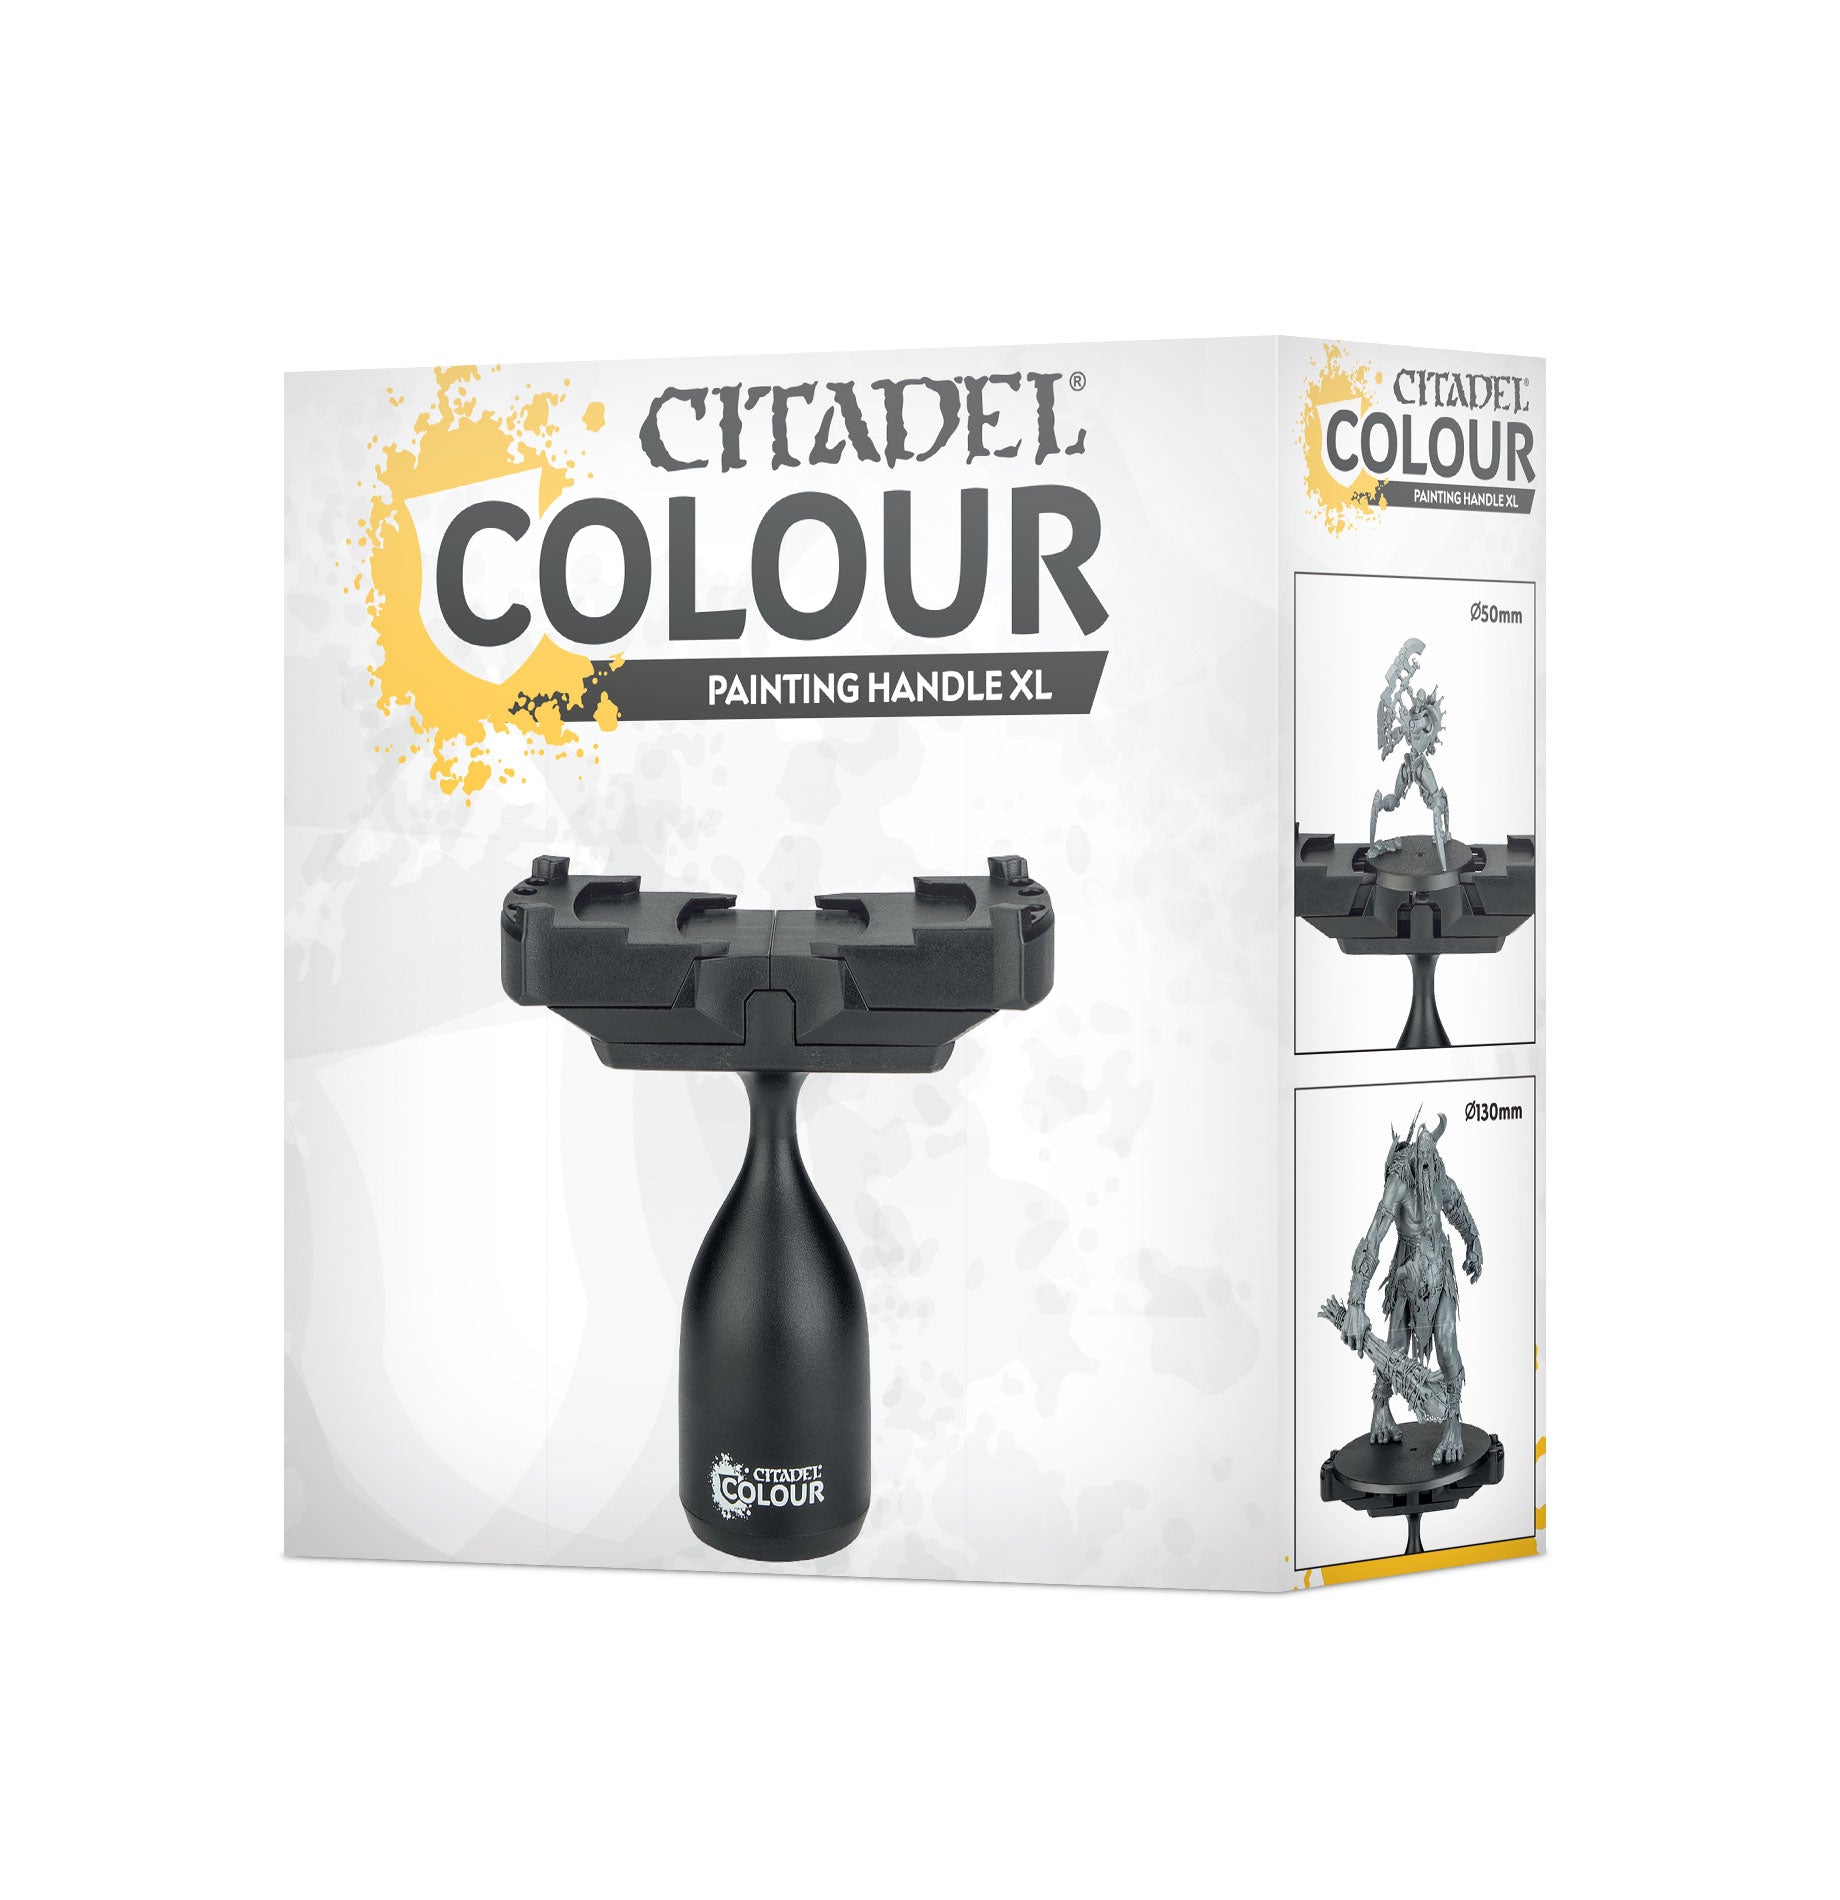 Citadel Colour Painting Handle XL | Lots Moore NSW